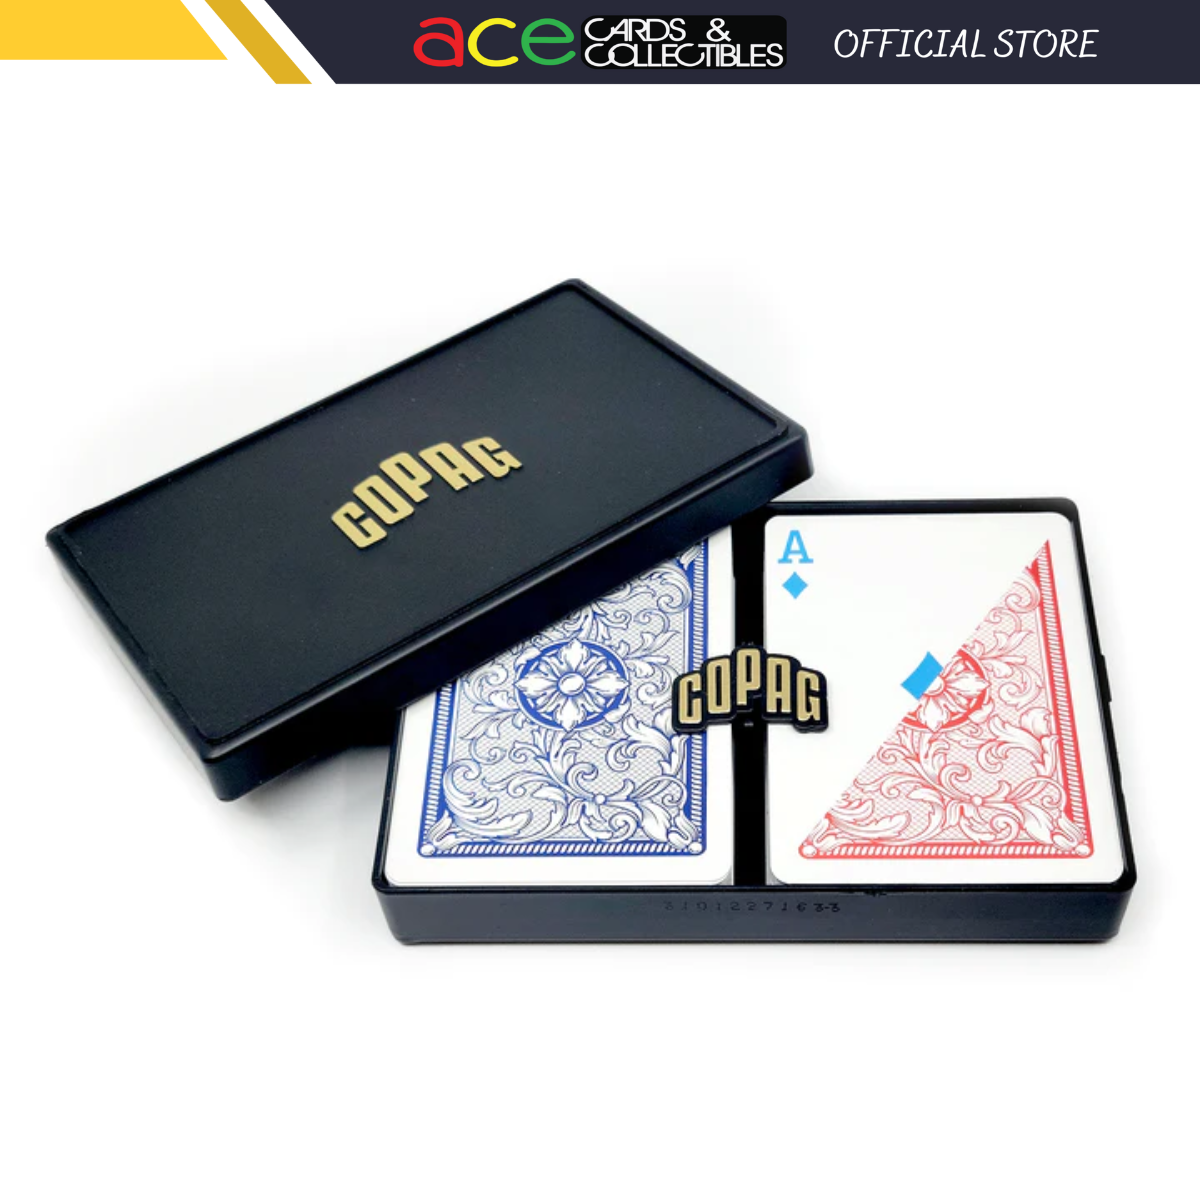 Copag Legacy Plastic Playing Cards Regular Index Double Pack-Copag-Ace Cards & Collectibles